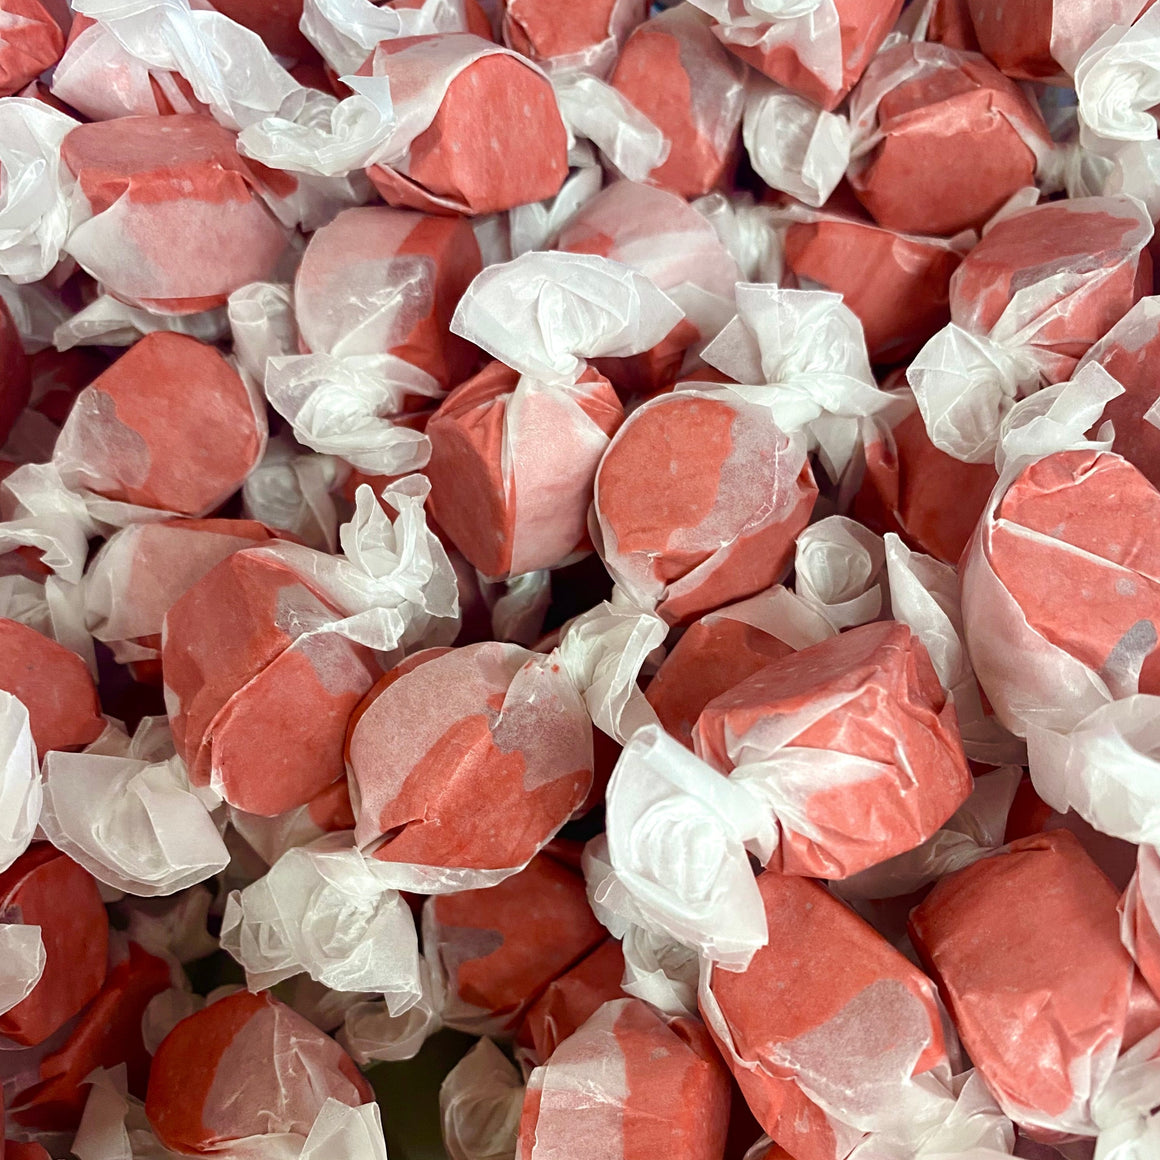 Red Licorice Salt Water Taffy. For fresh candy and great service, visit www.allcitycandy.com